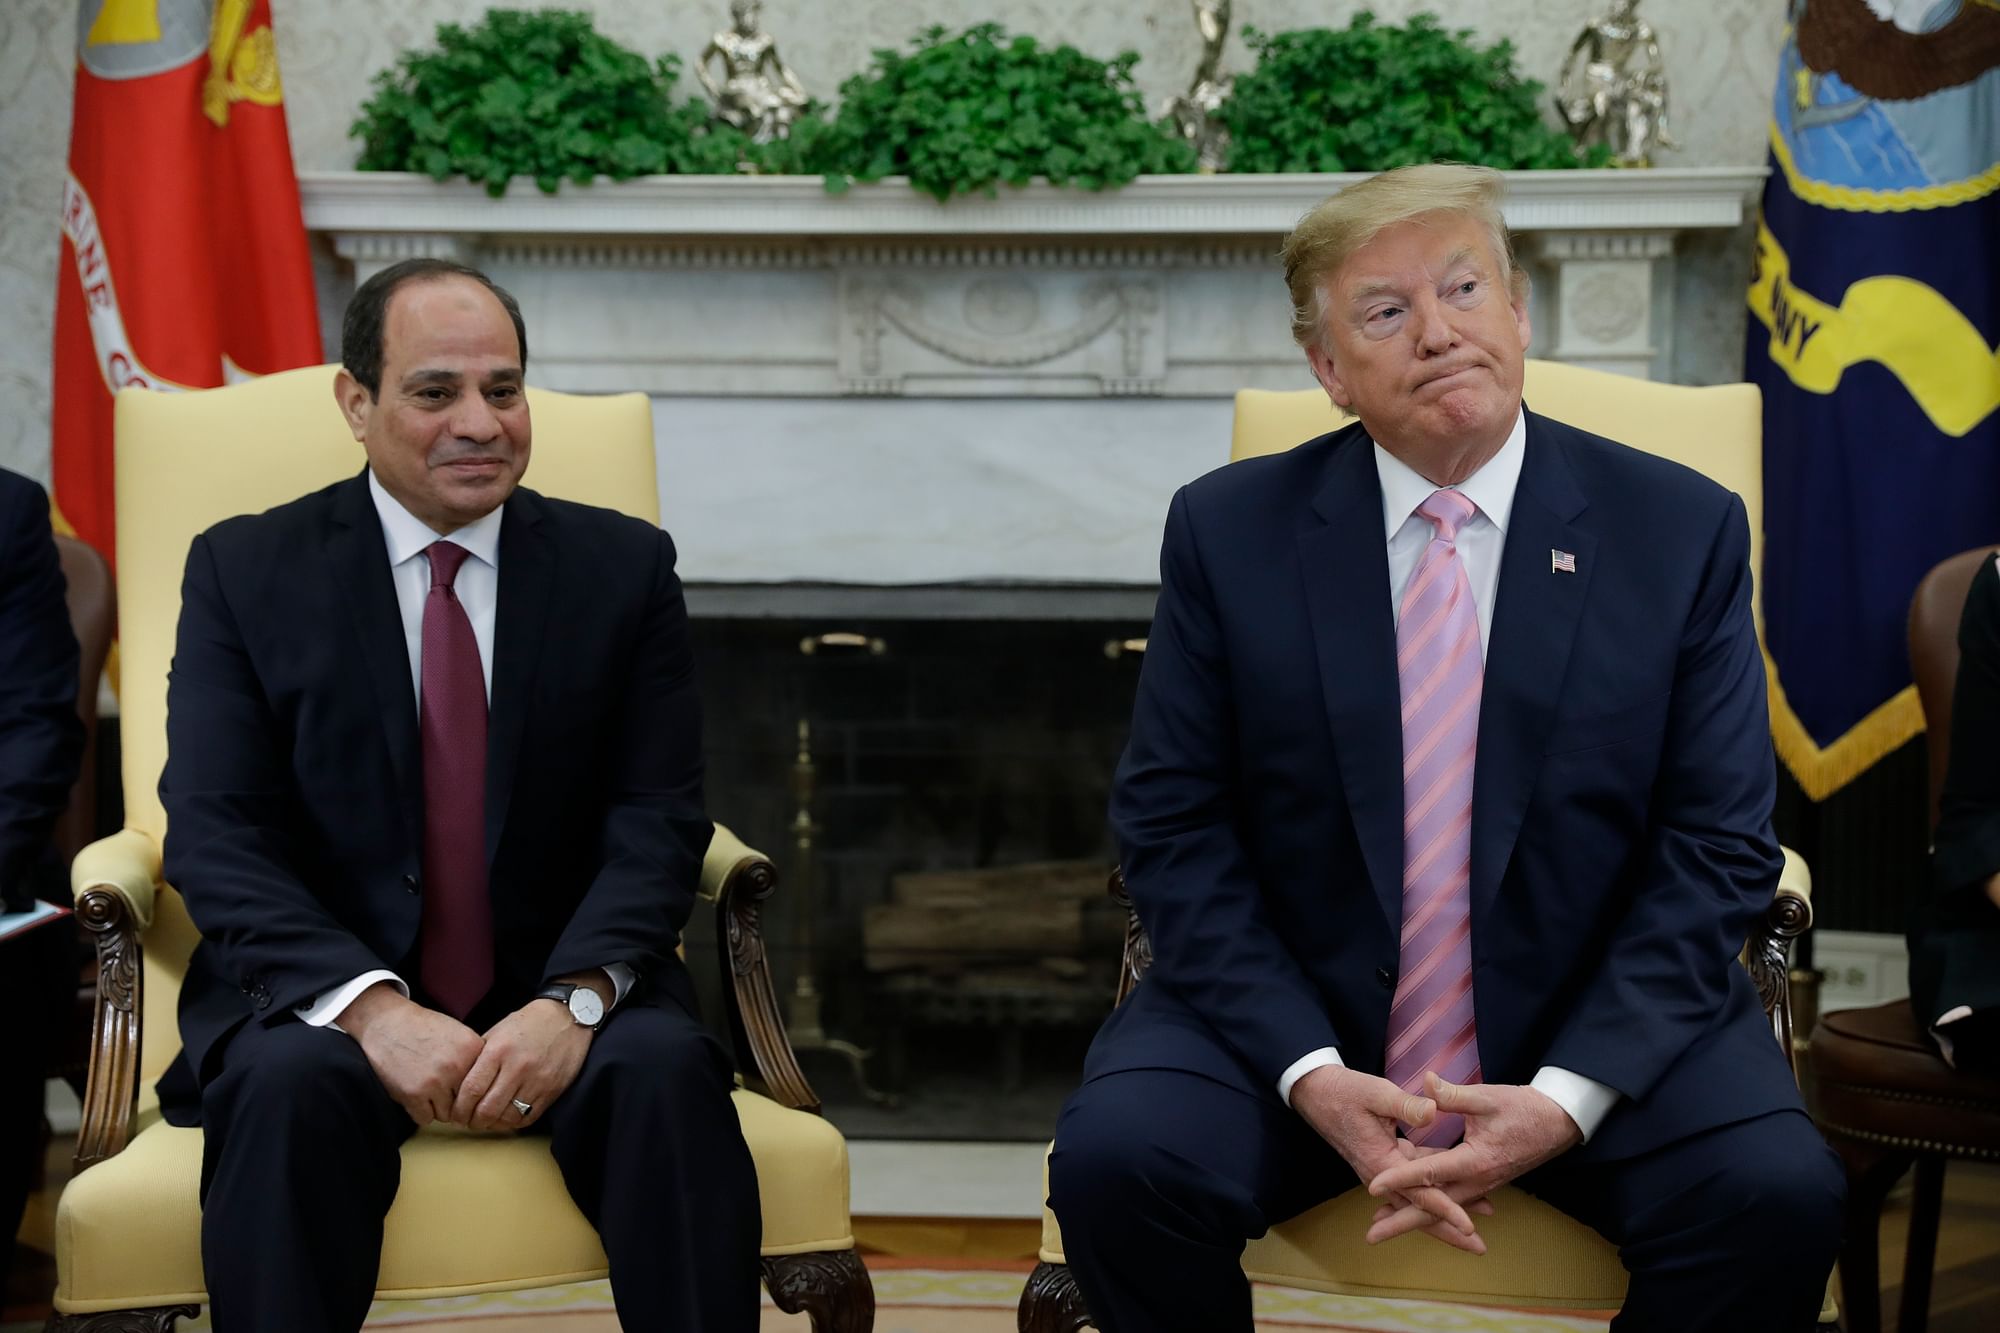 President Donald Trump meets with Egyptian President Abdel Fattah el-Sisi in the Oval Office of the White House.